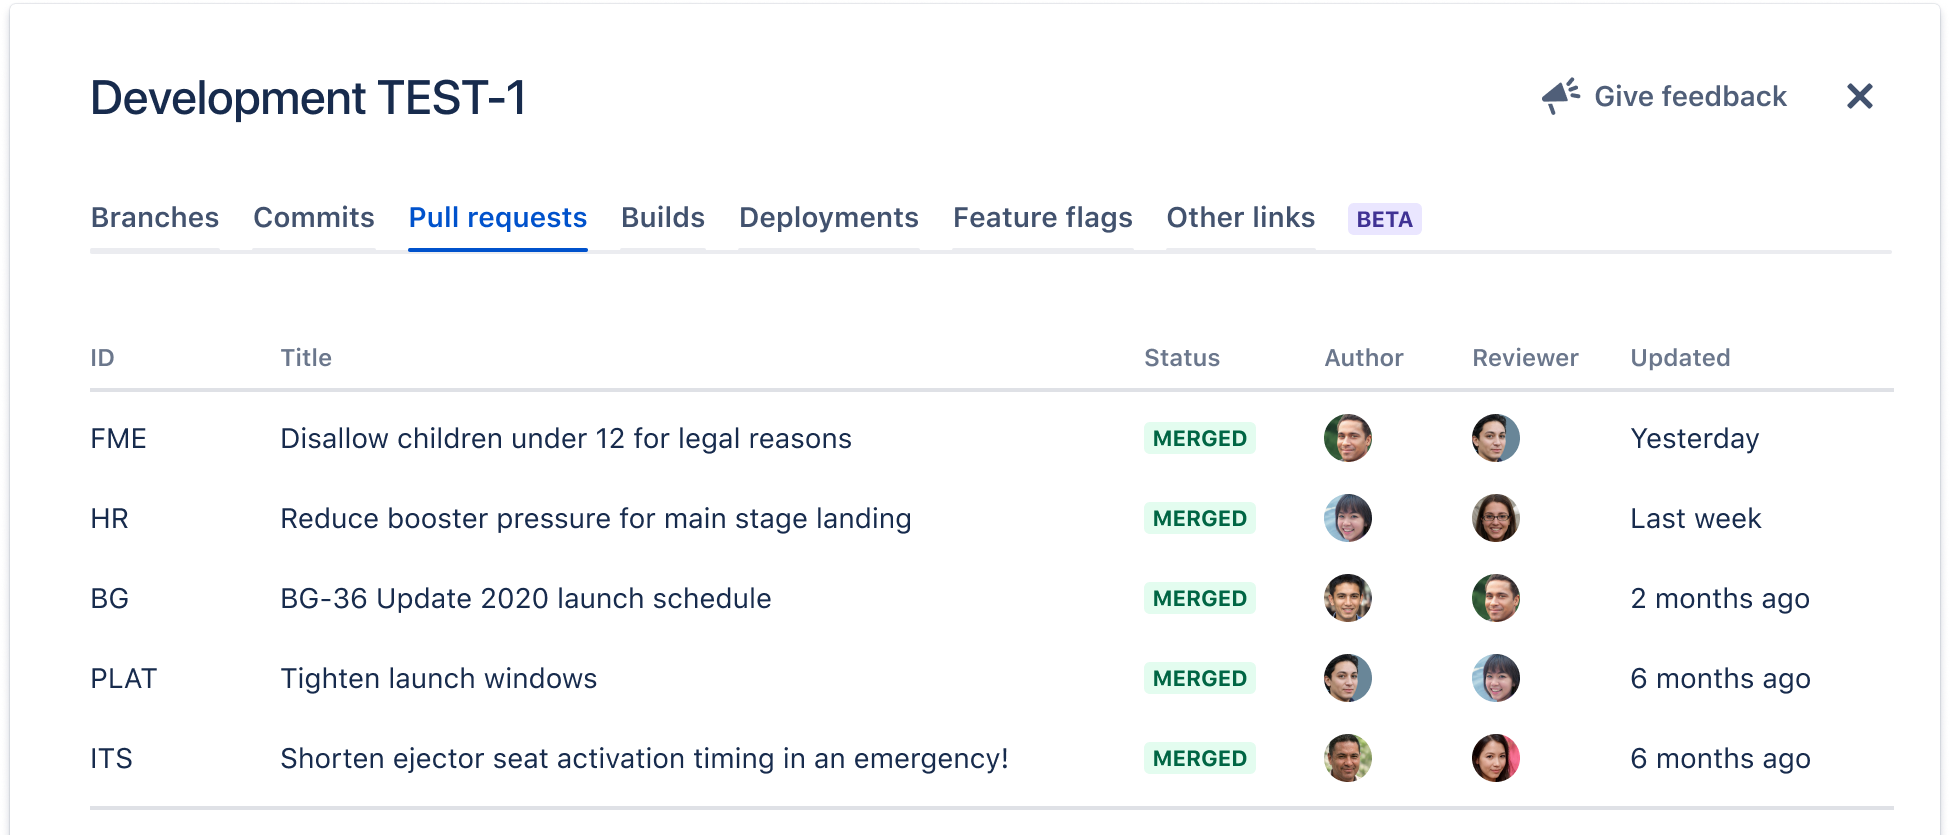  The development dialog in Jira Software, showing 5 pull requests with Merged status